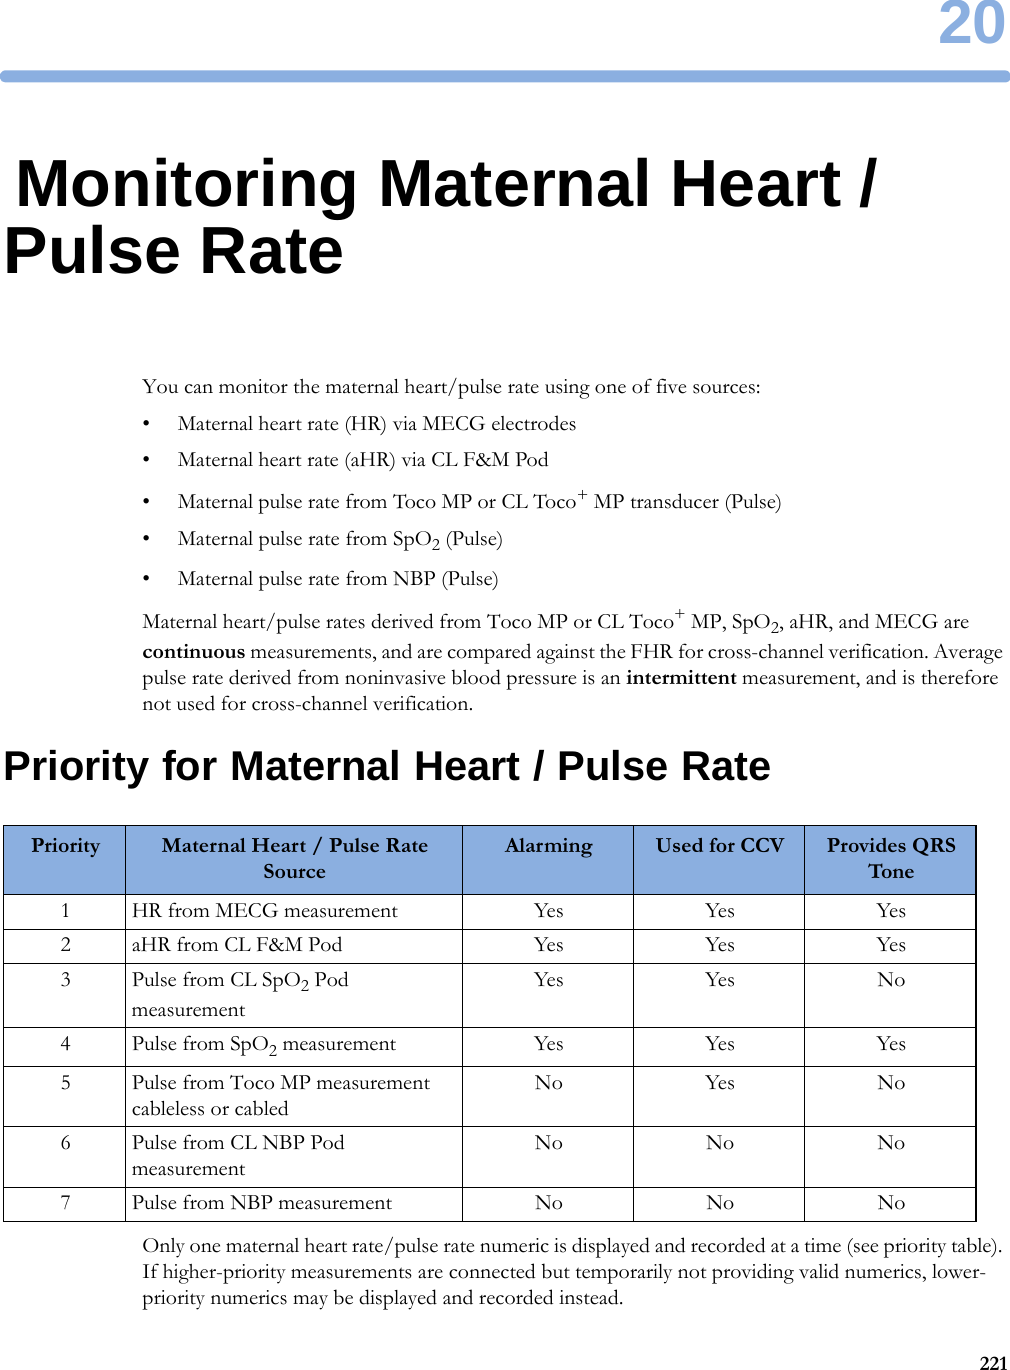 2022120Monitoring Maternal Heart / Pulse RateYou can monitor the maternal heart/pulse rate using one of five sources:• Maternal heart rate (HR) via MECG electrodes• Maternal heart rate (aHR) via CL F&amp;M Pod• Maternal pulse rate from Toco MP or CL Toco+ MP transducer (Pulse)• Maternal pulse rate from SpO2 (Pulse)• Maternal pulse rate from NBP (Pulse)Maternal heart/pulse rates derived from Toco MP or CL Toco+ MP, SpO2, aHR, and MECG are continuous measurements, and are compared against the FHR for cross-channel verification. Average pulse rate derived from noninvasive blood pressure is an intermittent measurement, and is therefore not used for cross-channel verification.Priority for Maternal Heart / Pulse RateOnly one maternal heart rate/pulse rate numeric is displayed and recorded at a time (see priority table). If higher-priority measurements are connected but temporarily not providing valid numerics, lower-priority numerics may be displayed and recorded instead.Priority Maternal Heart / Pulse Rate SourceAlarming Used for CCV Provides QRS Tone1 HR from MECG measurement Yes Yes Yes2 aHR from CL F&amp;M Pod Yes Yes Yes3 Pulse from CL SpO2 Pod measurementYes Yes No4Pulse from SpO2 measurement Yes Yes Yes5 Pulse from Toco MP measurement cableless or cabled No Yes No6 Pulse from CL NBP Pod measurementNo No No7 Pulse from NBP measurement No No No